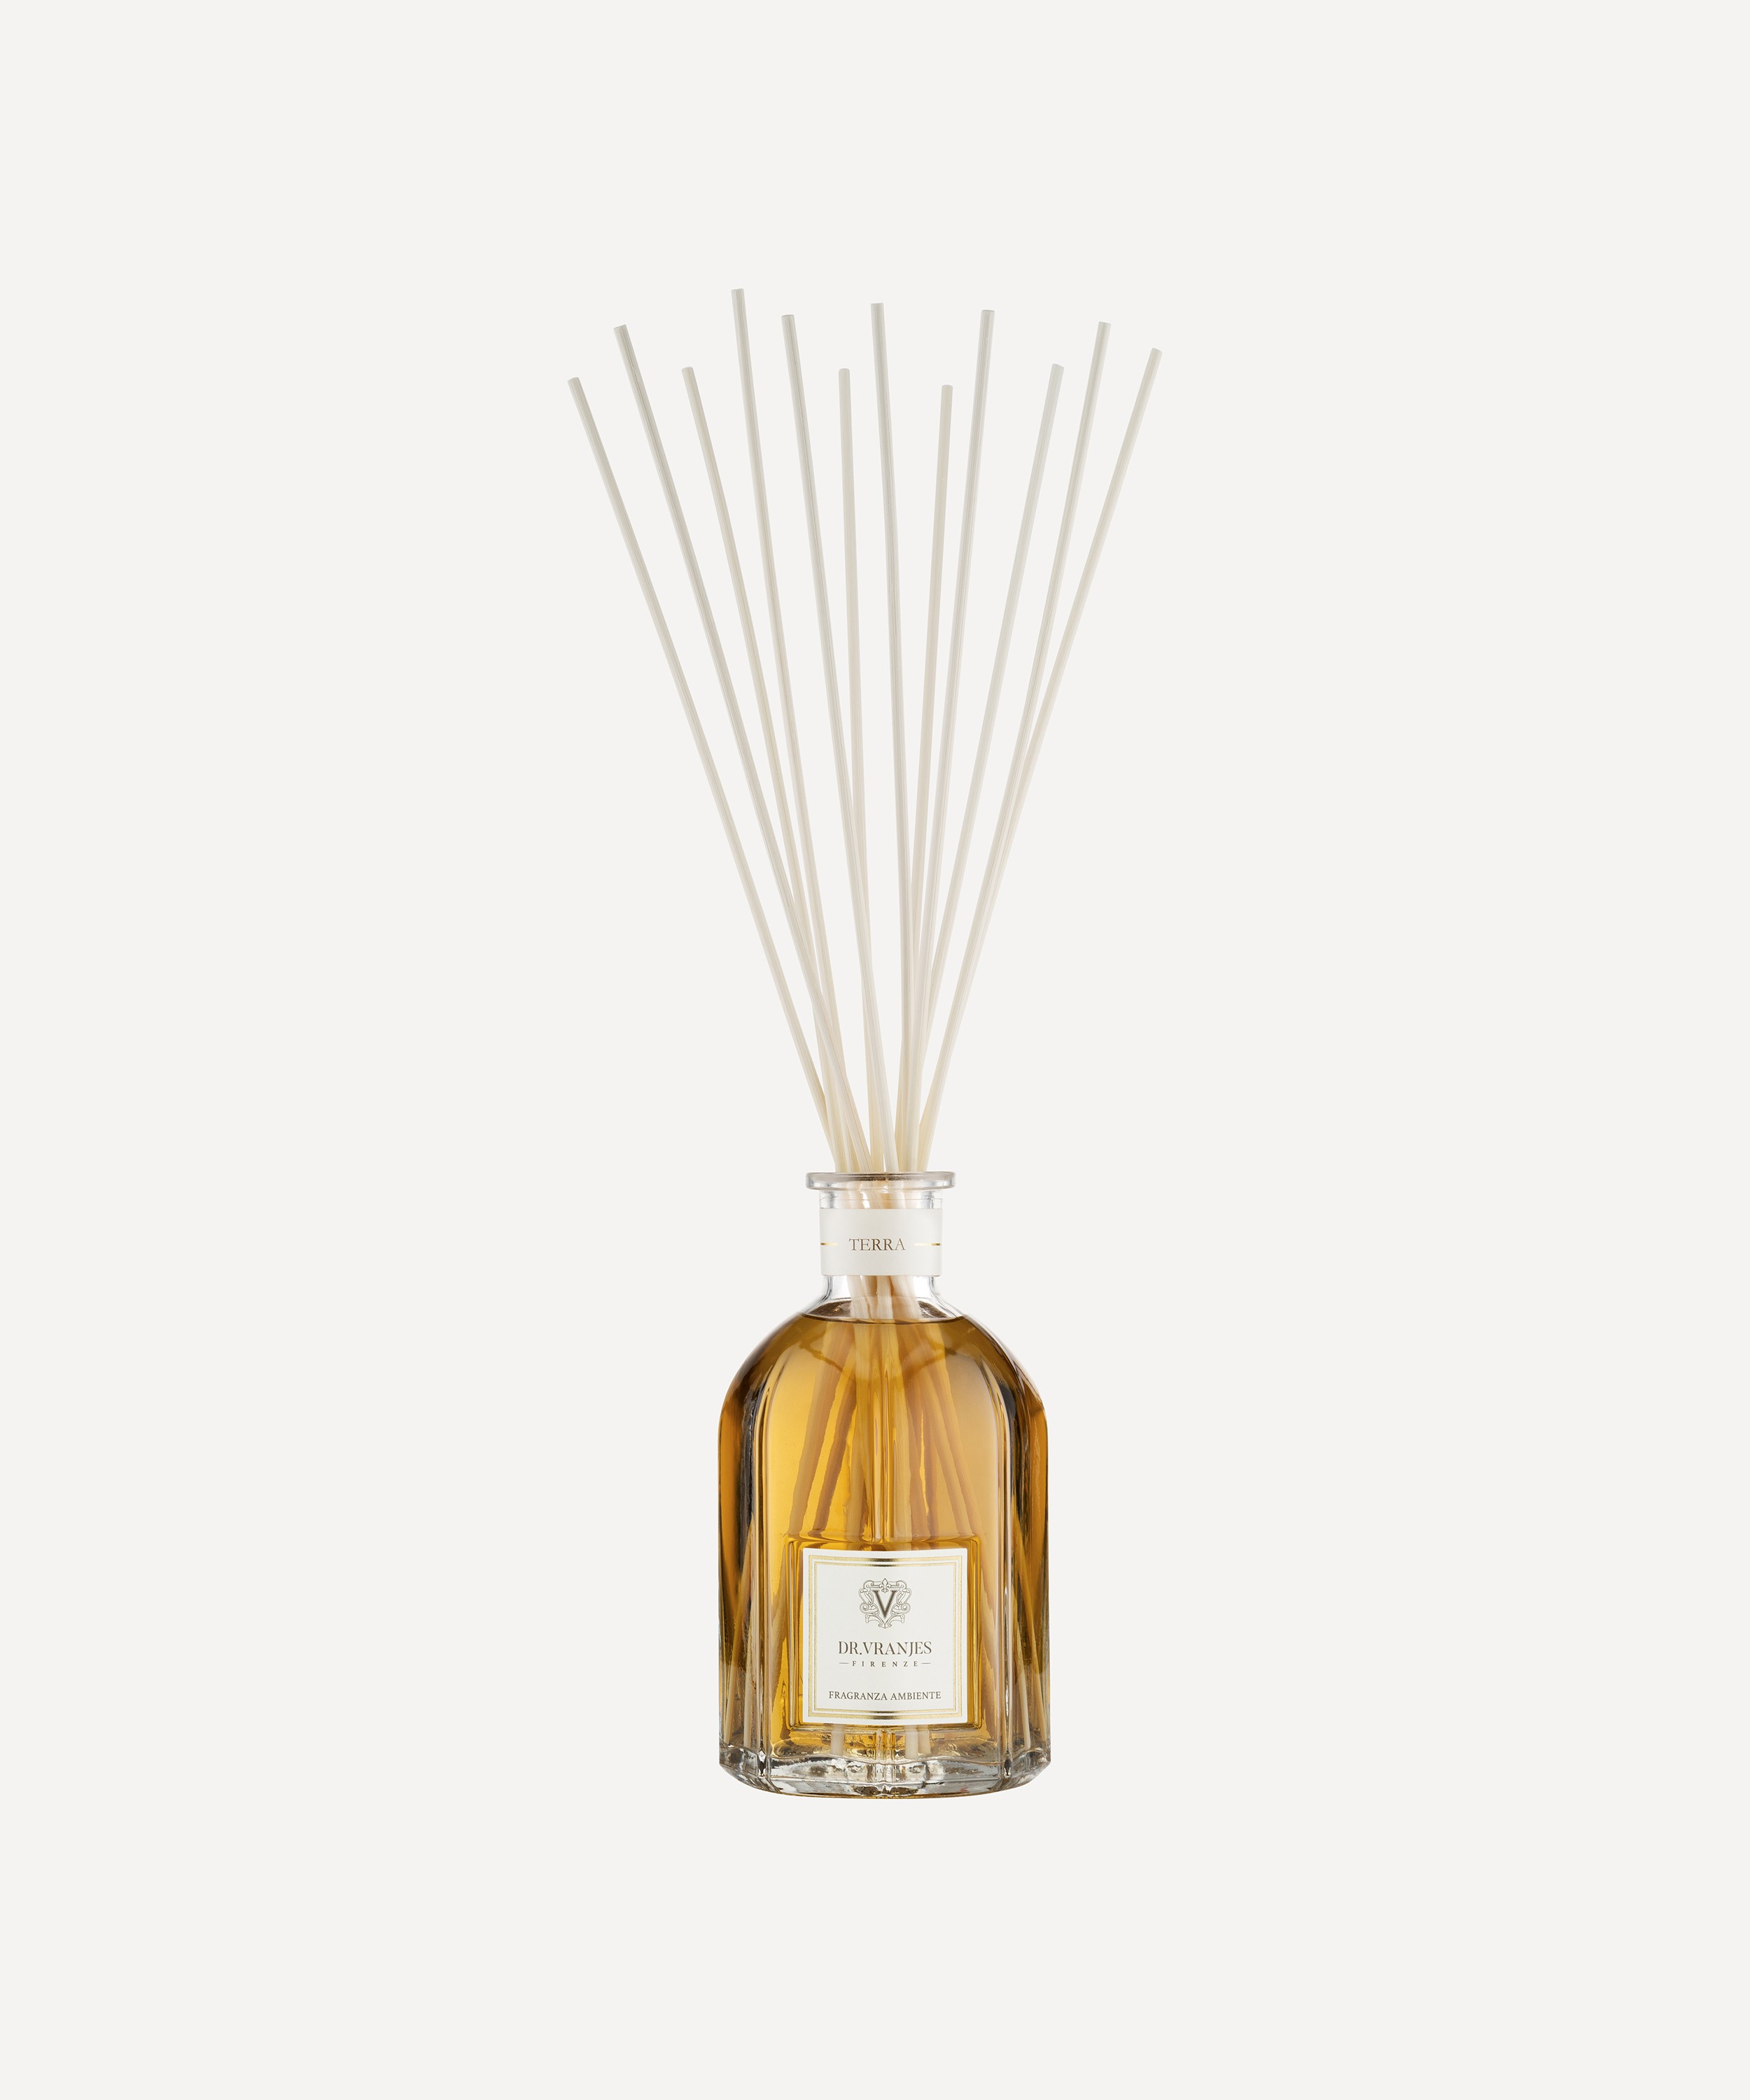 Dr Vranjes Firenze | Diffusers & Home Fragrances | Liberty